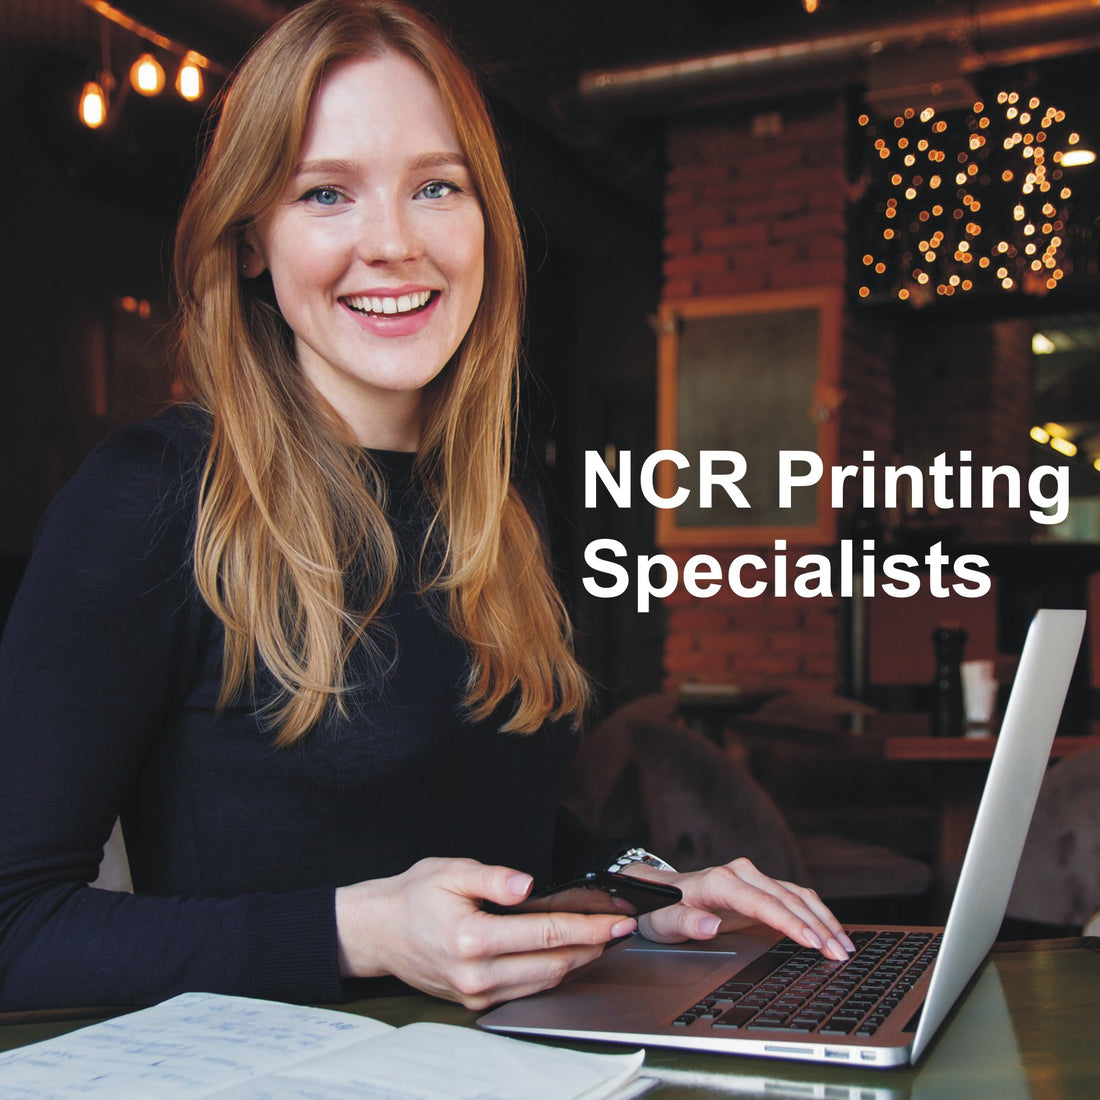 10 Reasons to Buy Personalised NCR Printing from MD Print Shop